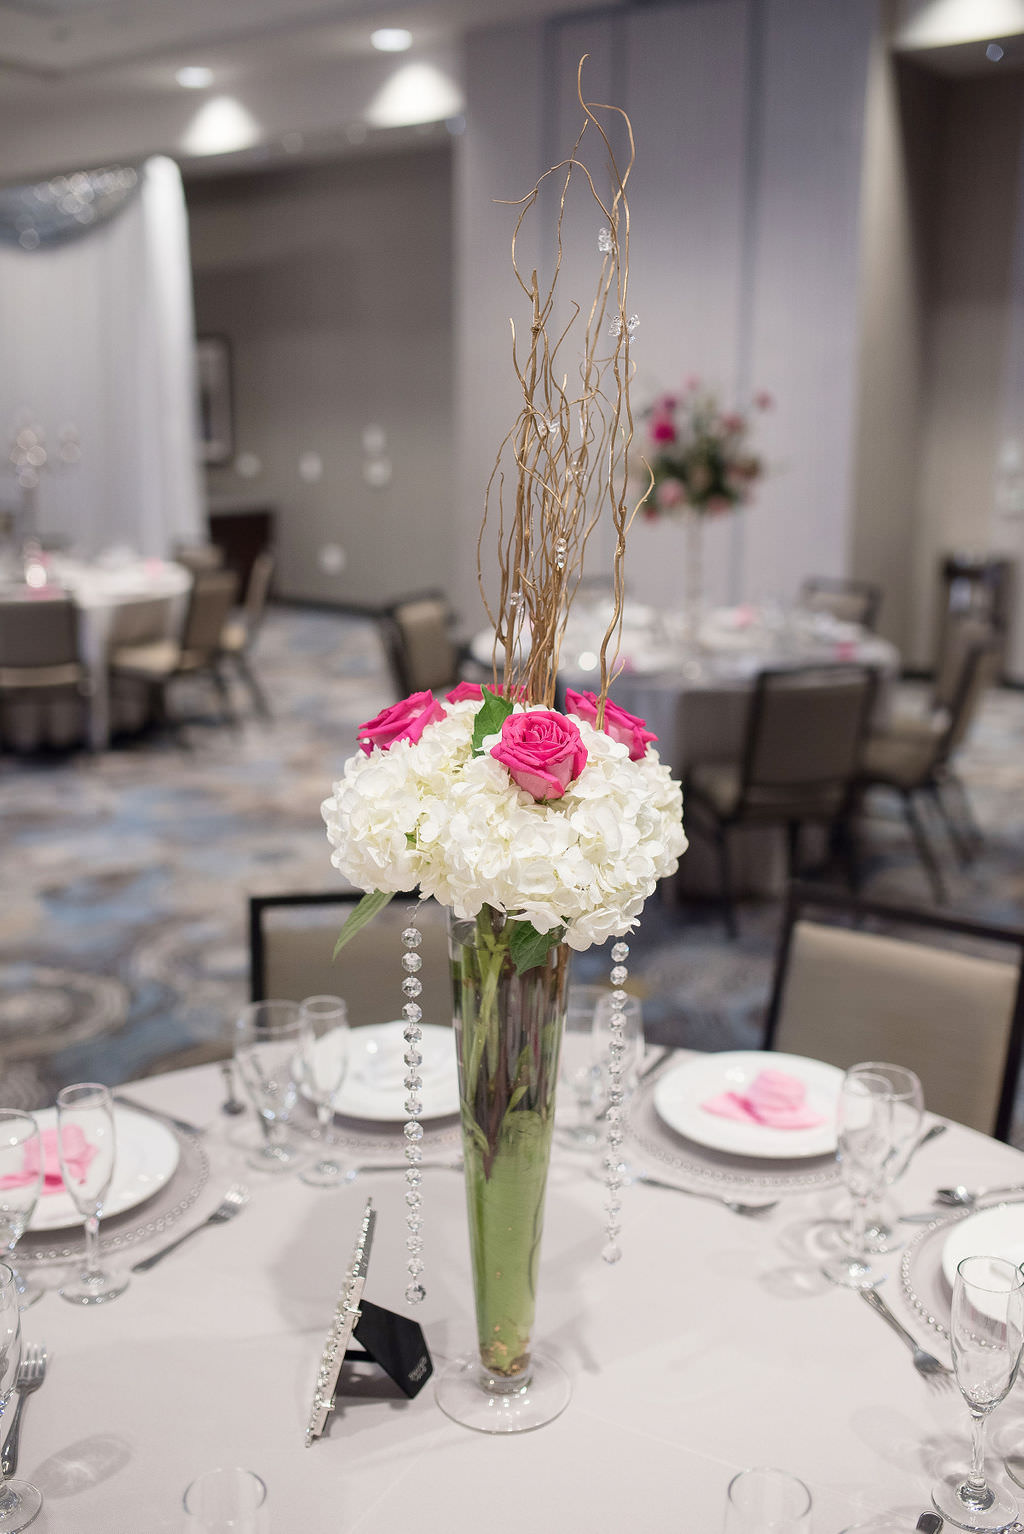 Modern Elegant Wedding Reception Decor, Tall Vase with White Hydrangeas, Fuschia Pink Roses, Decorative Sticks and Hanging Crystals Floral Centerpiece | Tampa Bay Wedding Photographer Kristen Marie Photography | Hotel Wedding Venue Hyatt Place Downtown St. Pete | Wedding Florist Brides N Blooms | Outside the Box Event Rentals